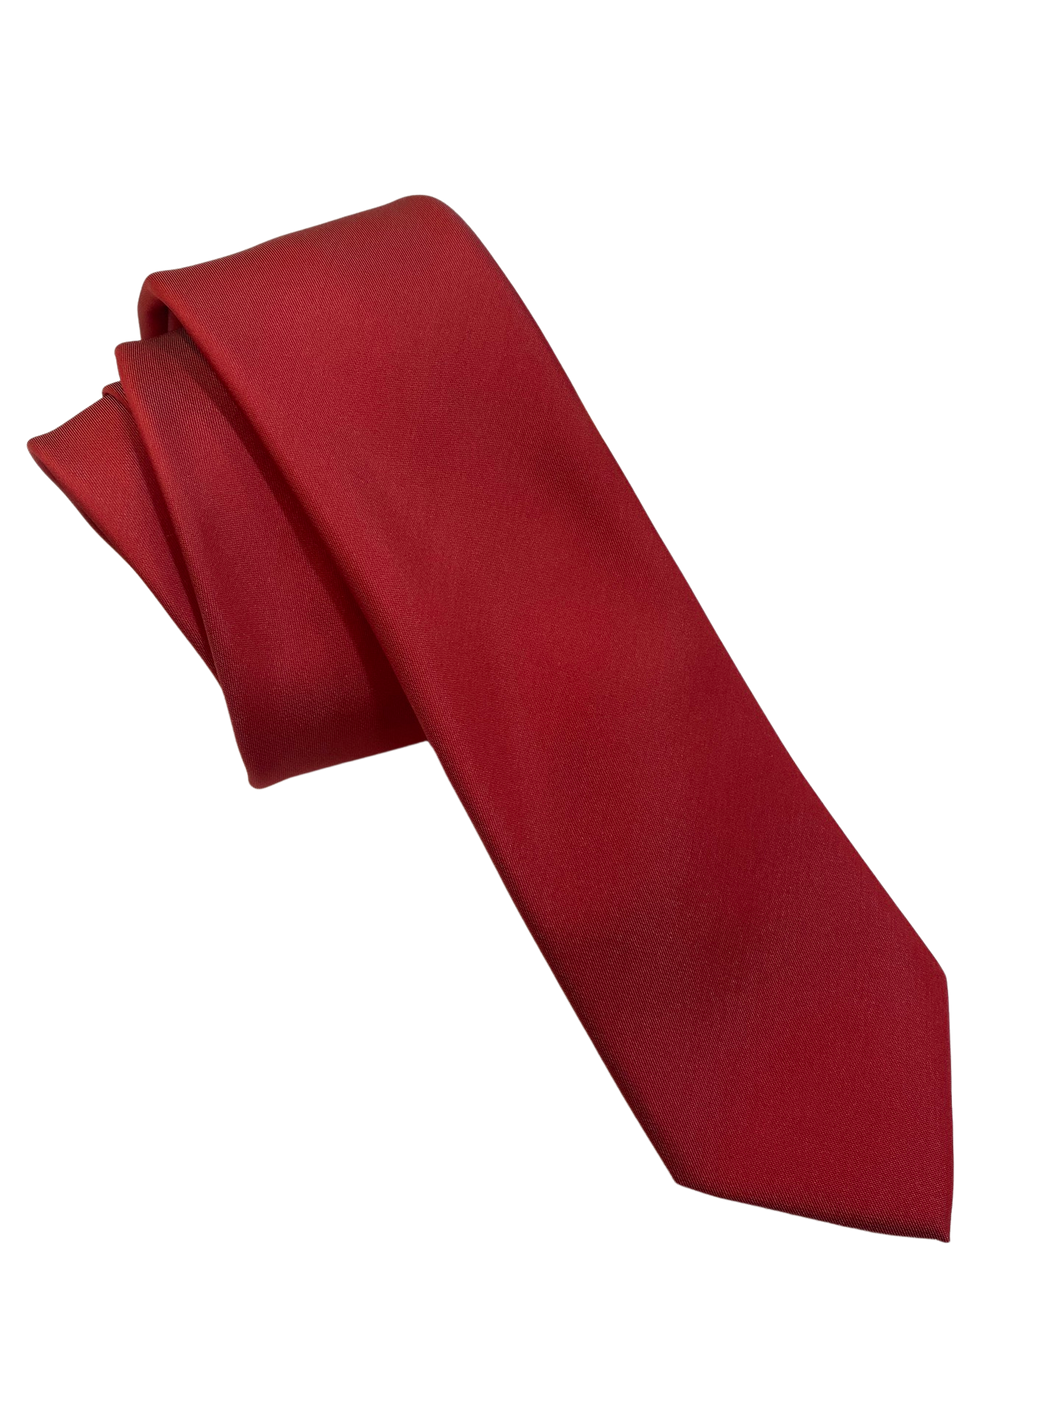 FX Fusion Apple Red Skinny Tie